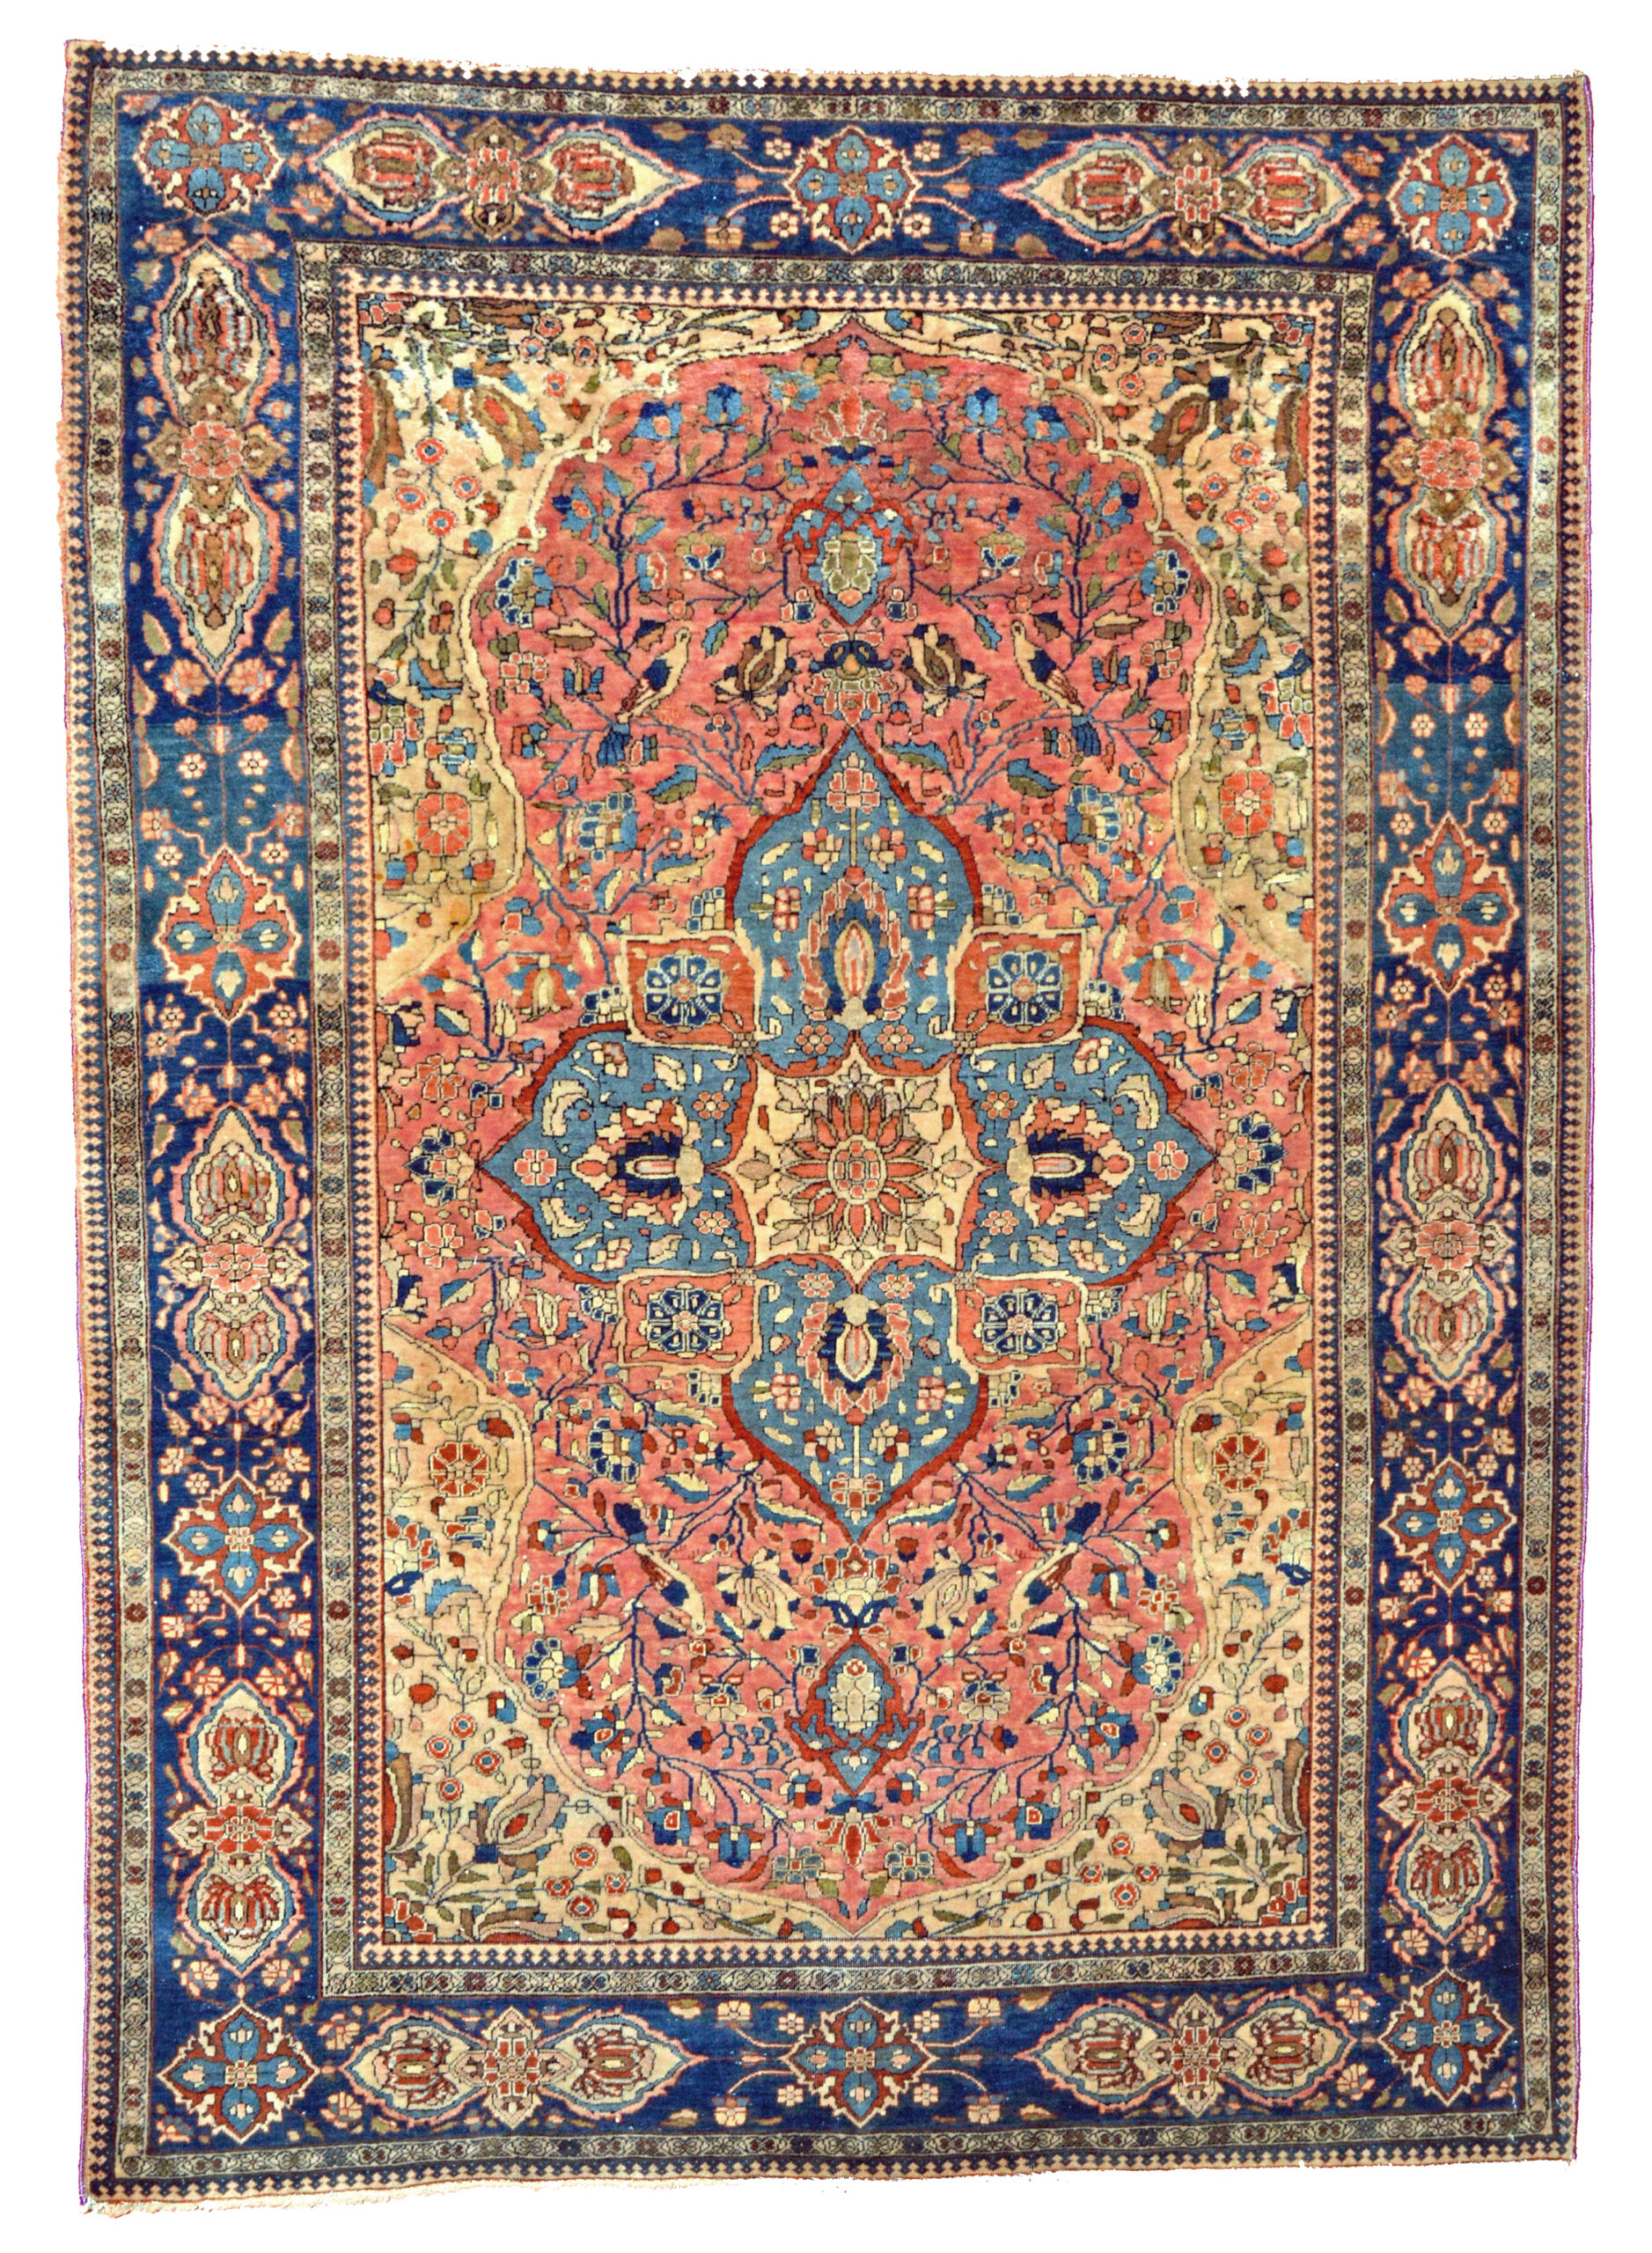 An antique Mohtasham Kashan rug, central Persia, circa 1900, Douglas Stock Gallery is one of America's most selective dealers in antique Oriental rugs, Boston,MA area antique rugs